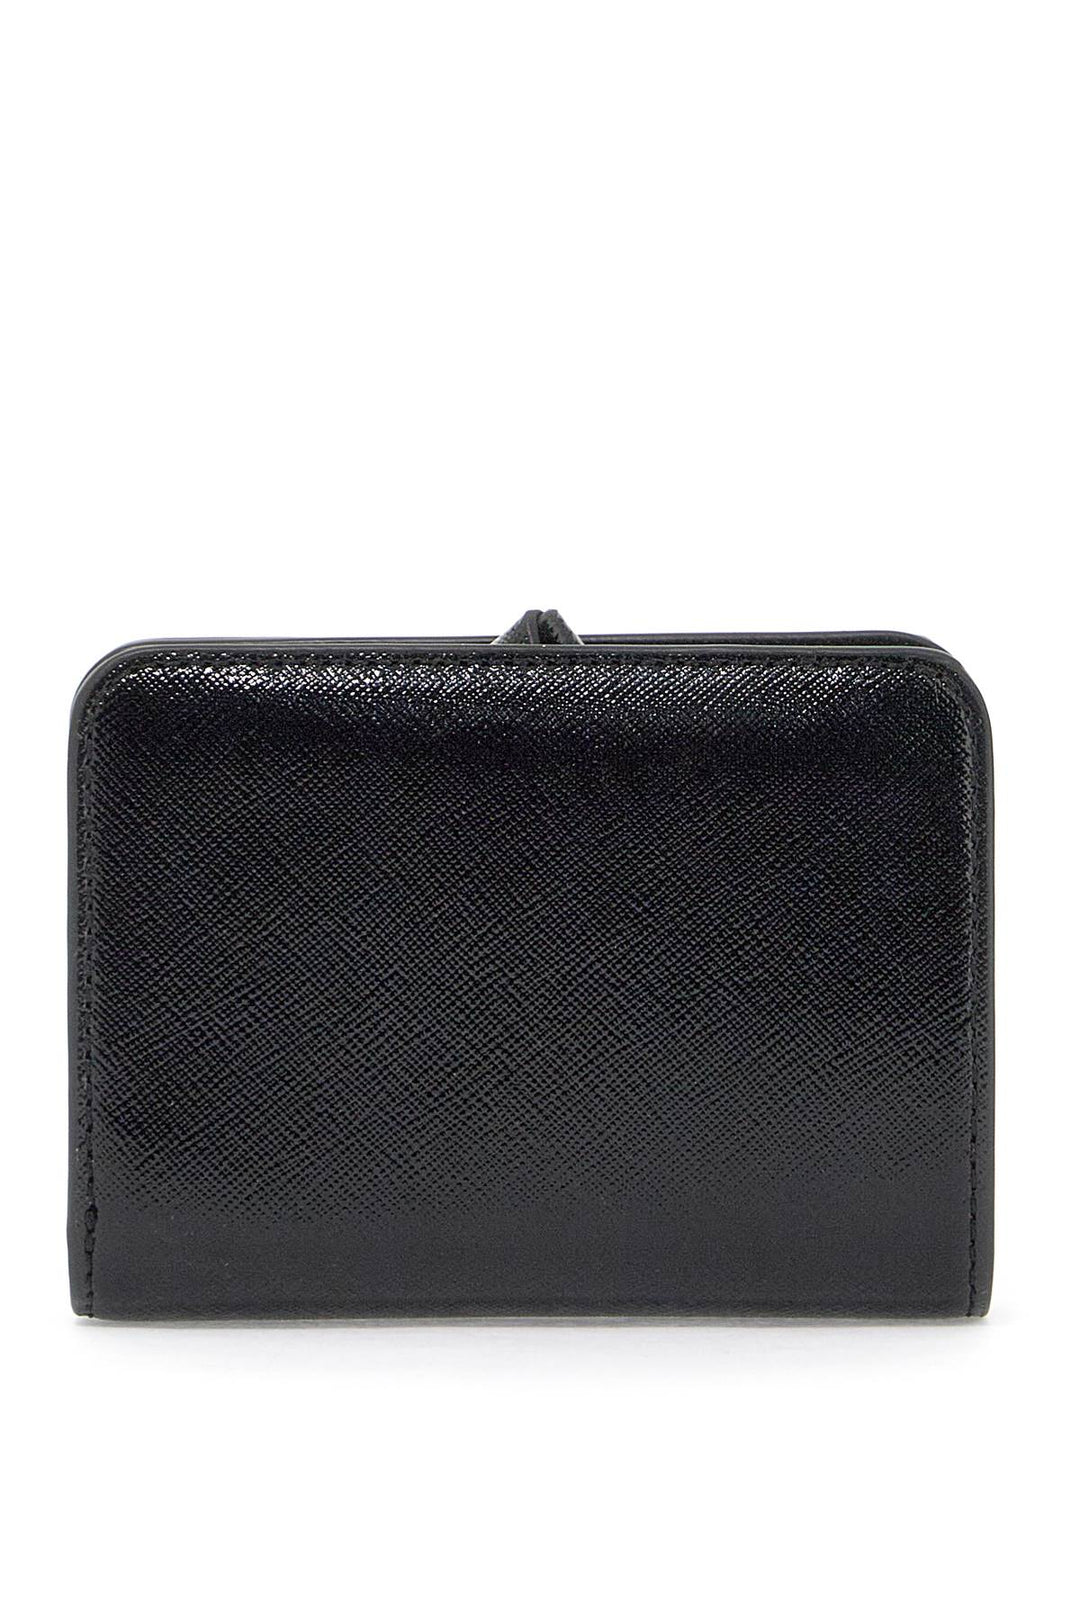 the utility snapshot mini compact wallet-2